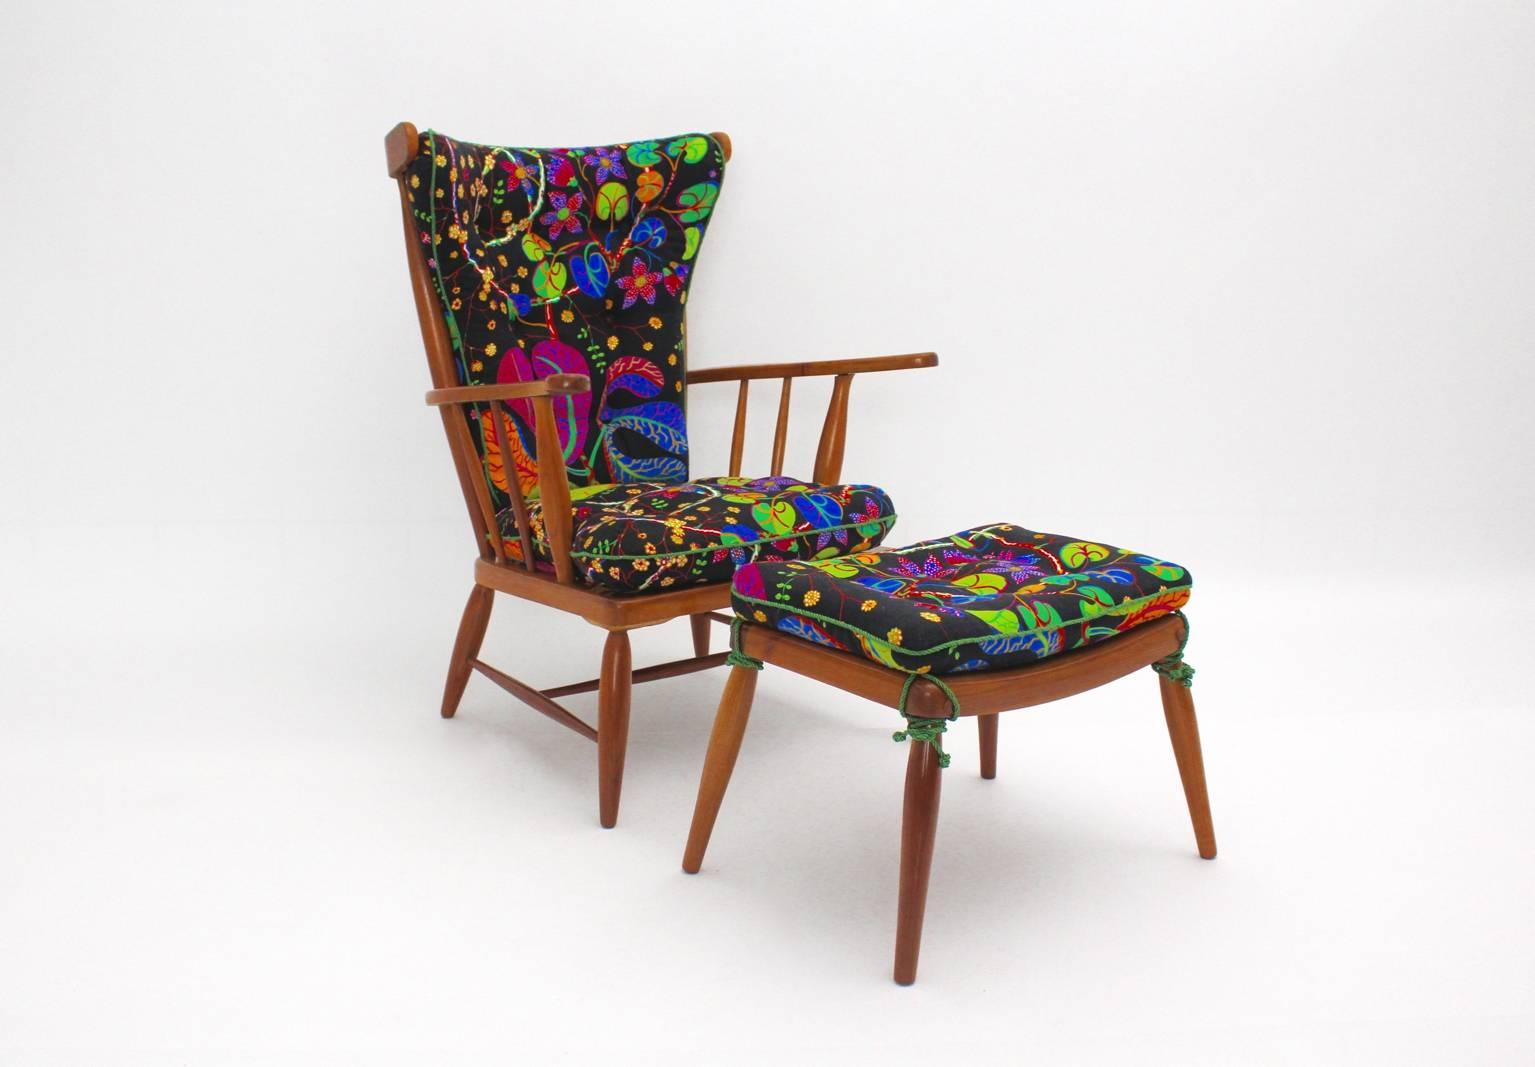 Mid Century Modern armchair or lounge chair with ottoman from solid cherrywood by Anna Lülja Praun, circa 1952 Austria.

Anna Lülja Praun (1906-2004) created also many furniture designs for the famed Viennese Interior shop 